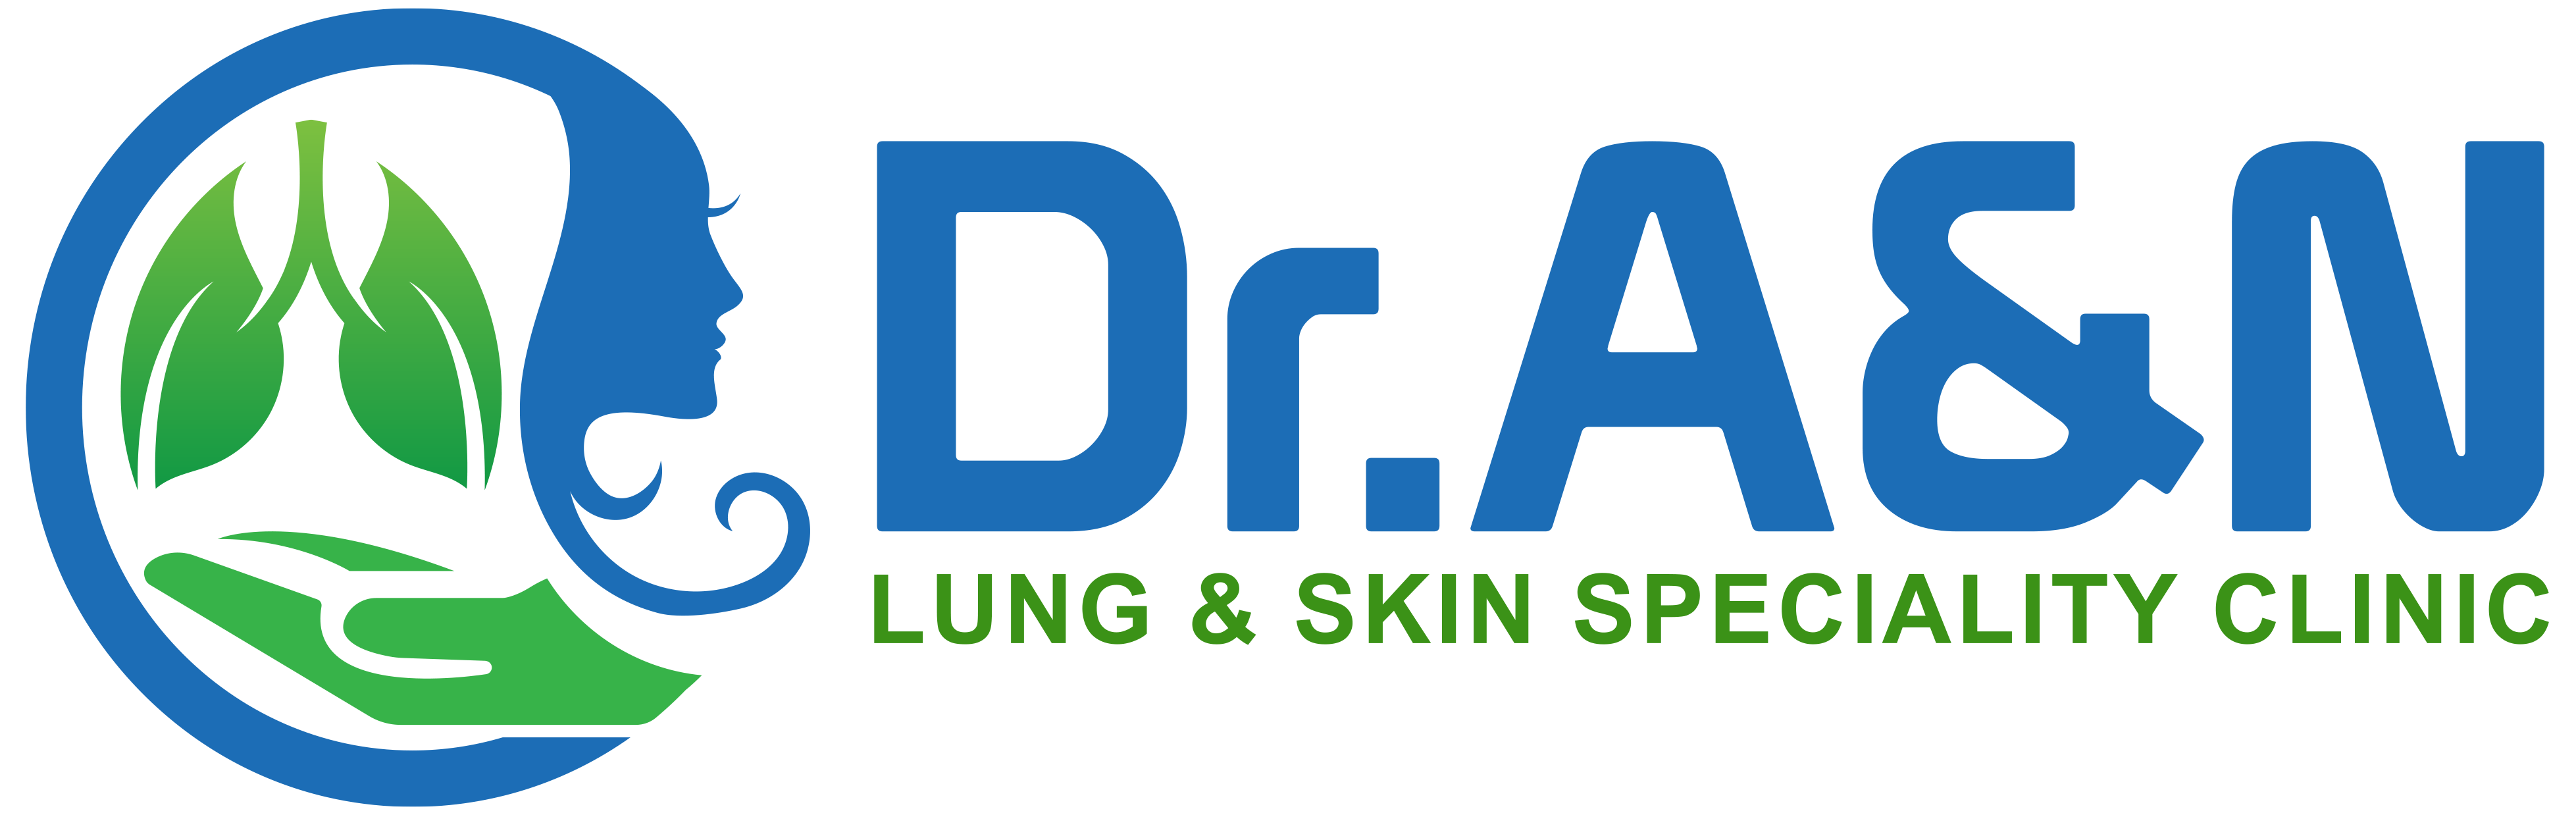 Dr A & N Lung and Skin Speciality Clinic - Hi Tech City, hyderabad